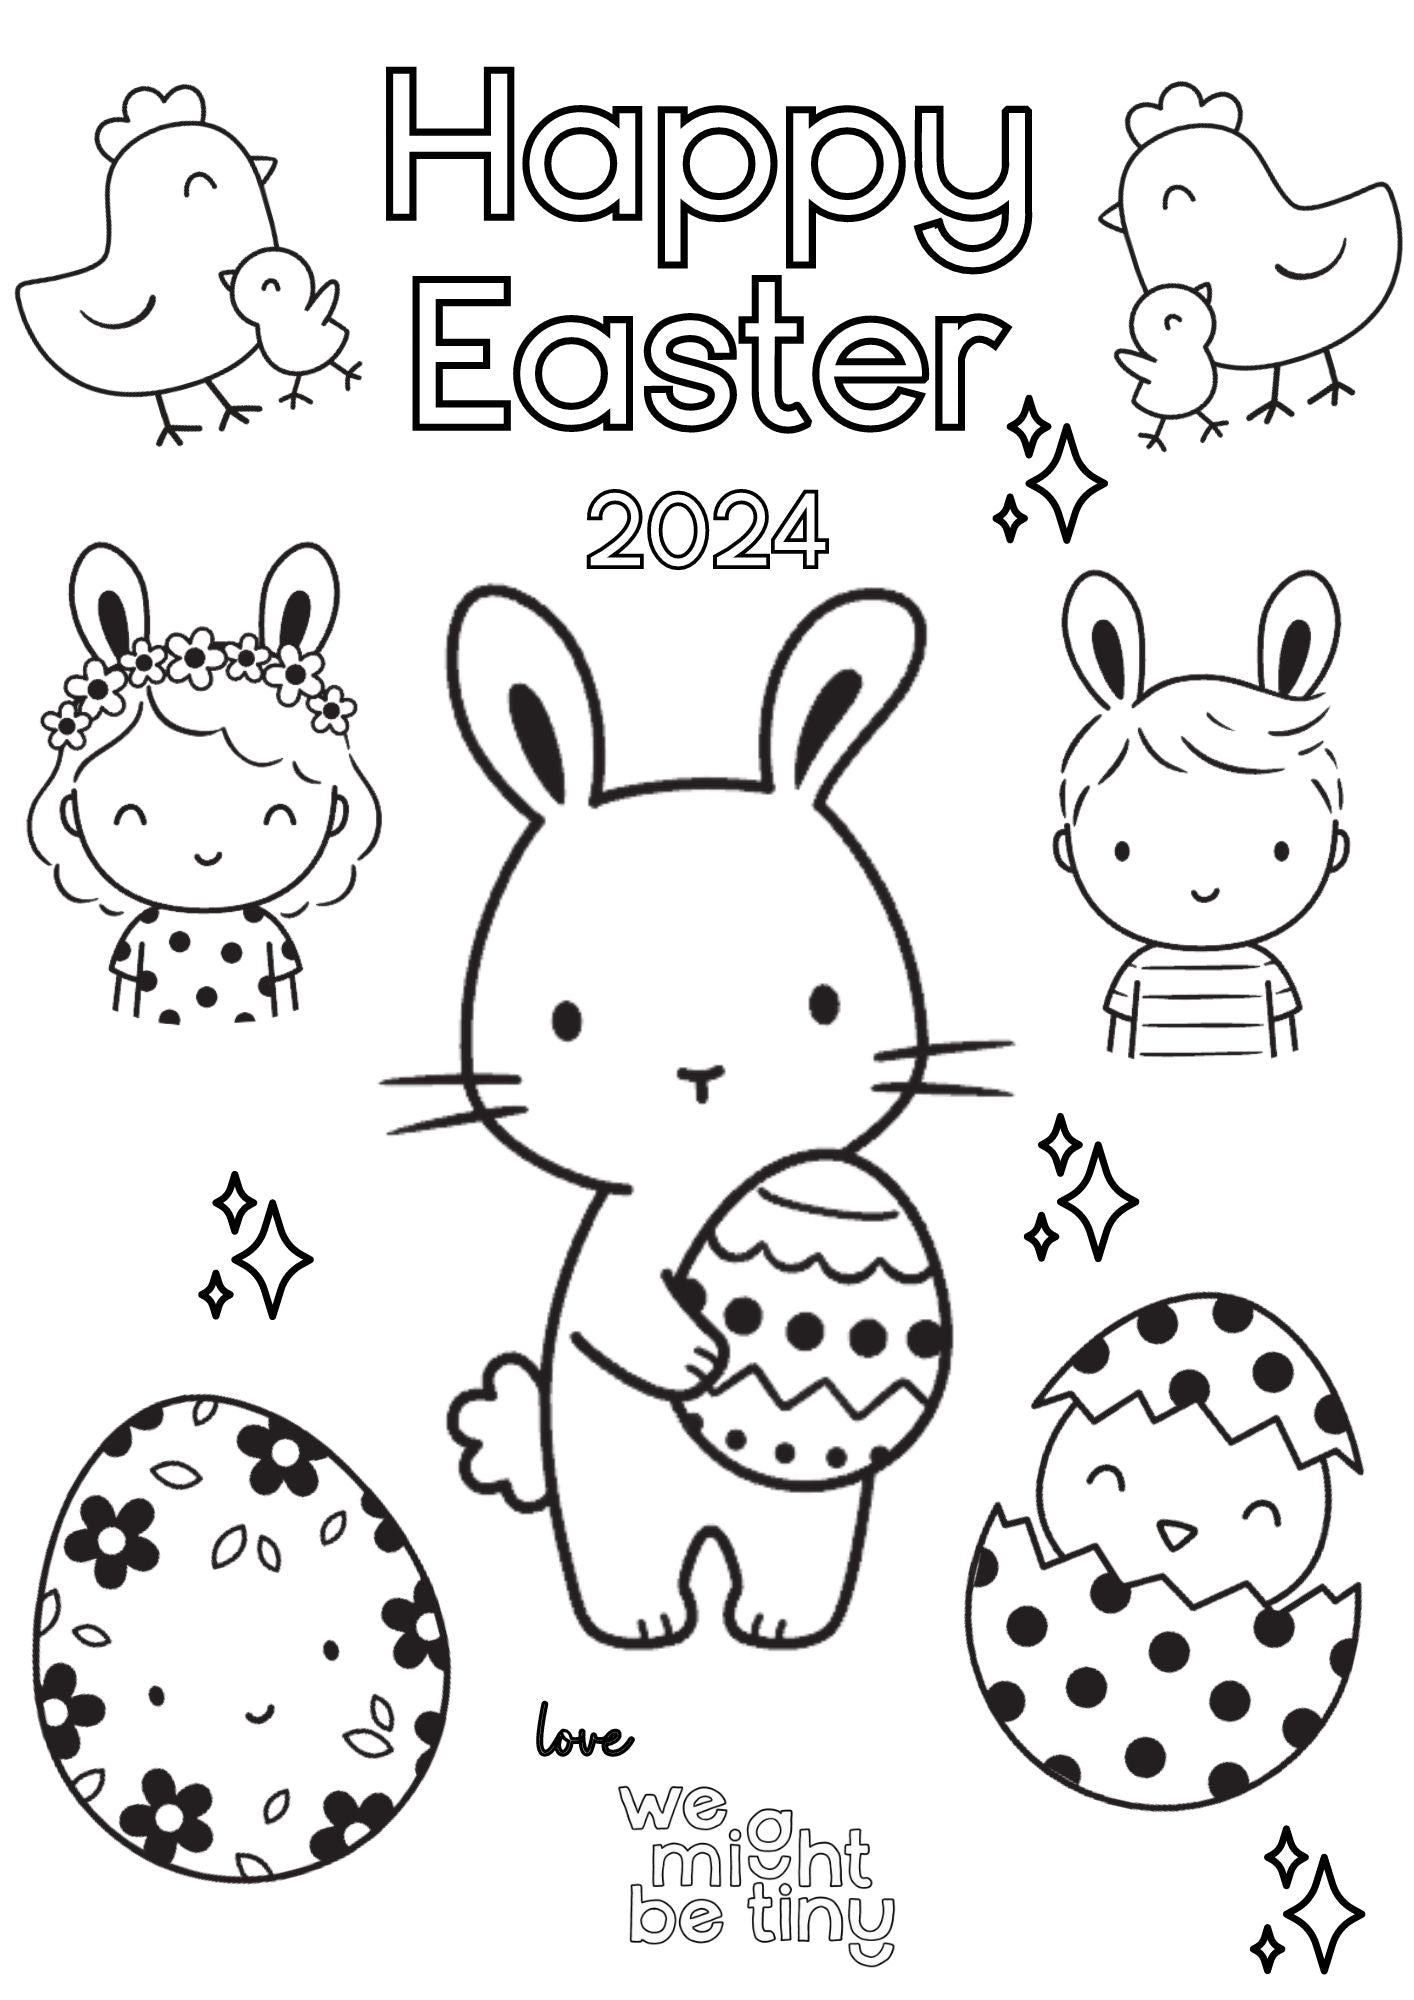 Hoppy Easter Fun: Download Our Free Easter Colouring Sheet!